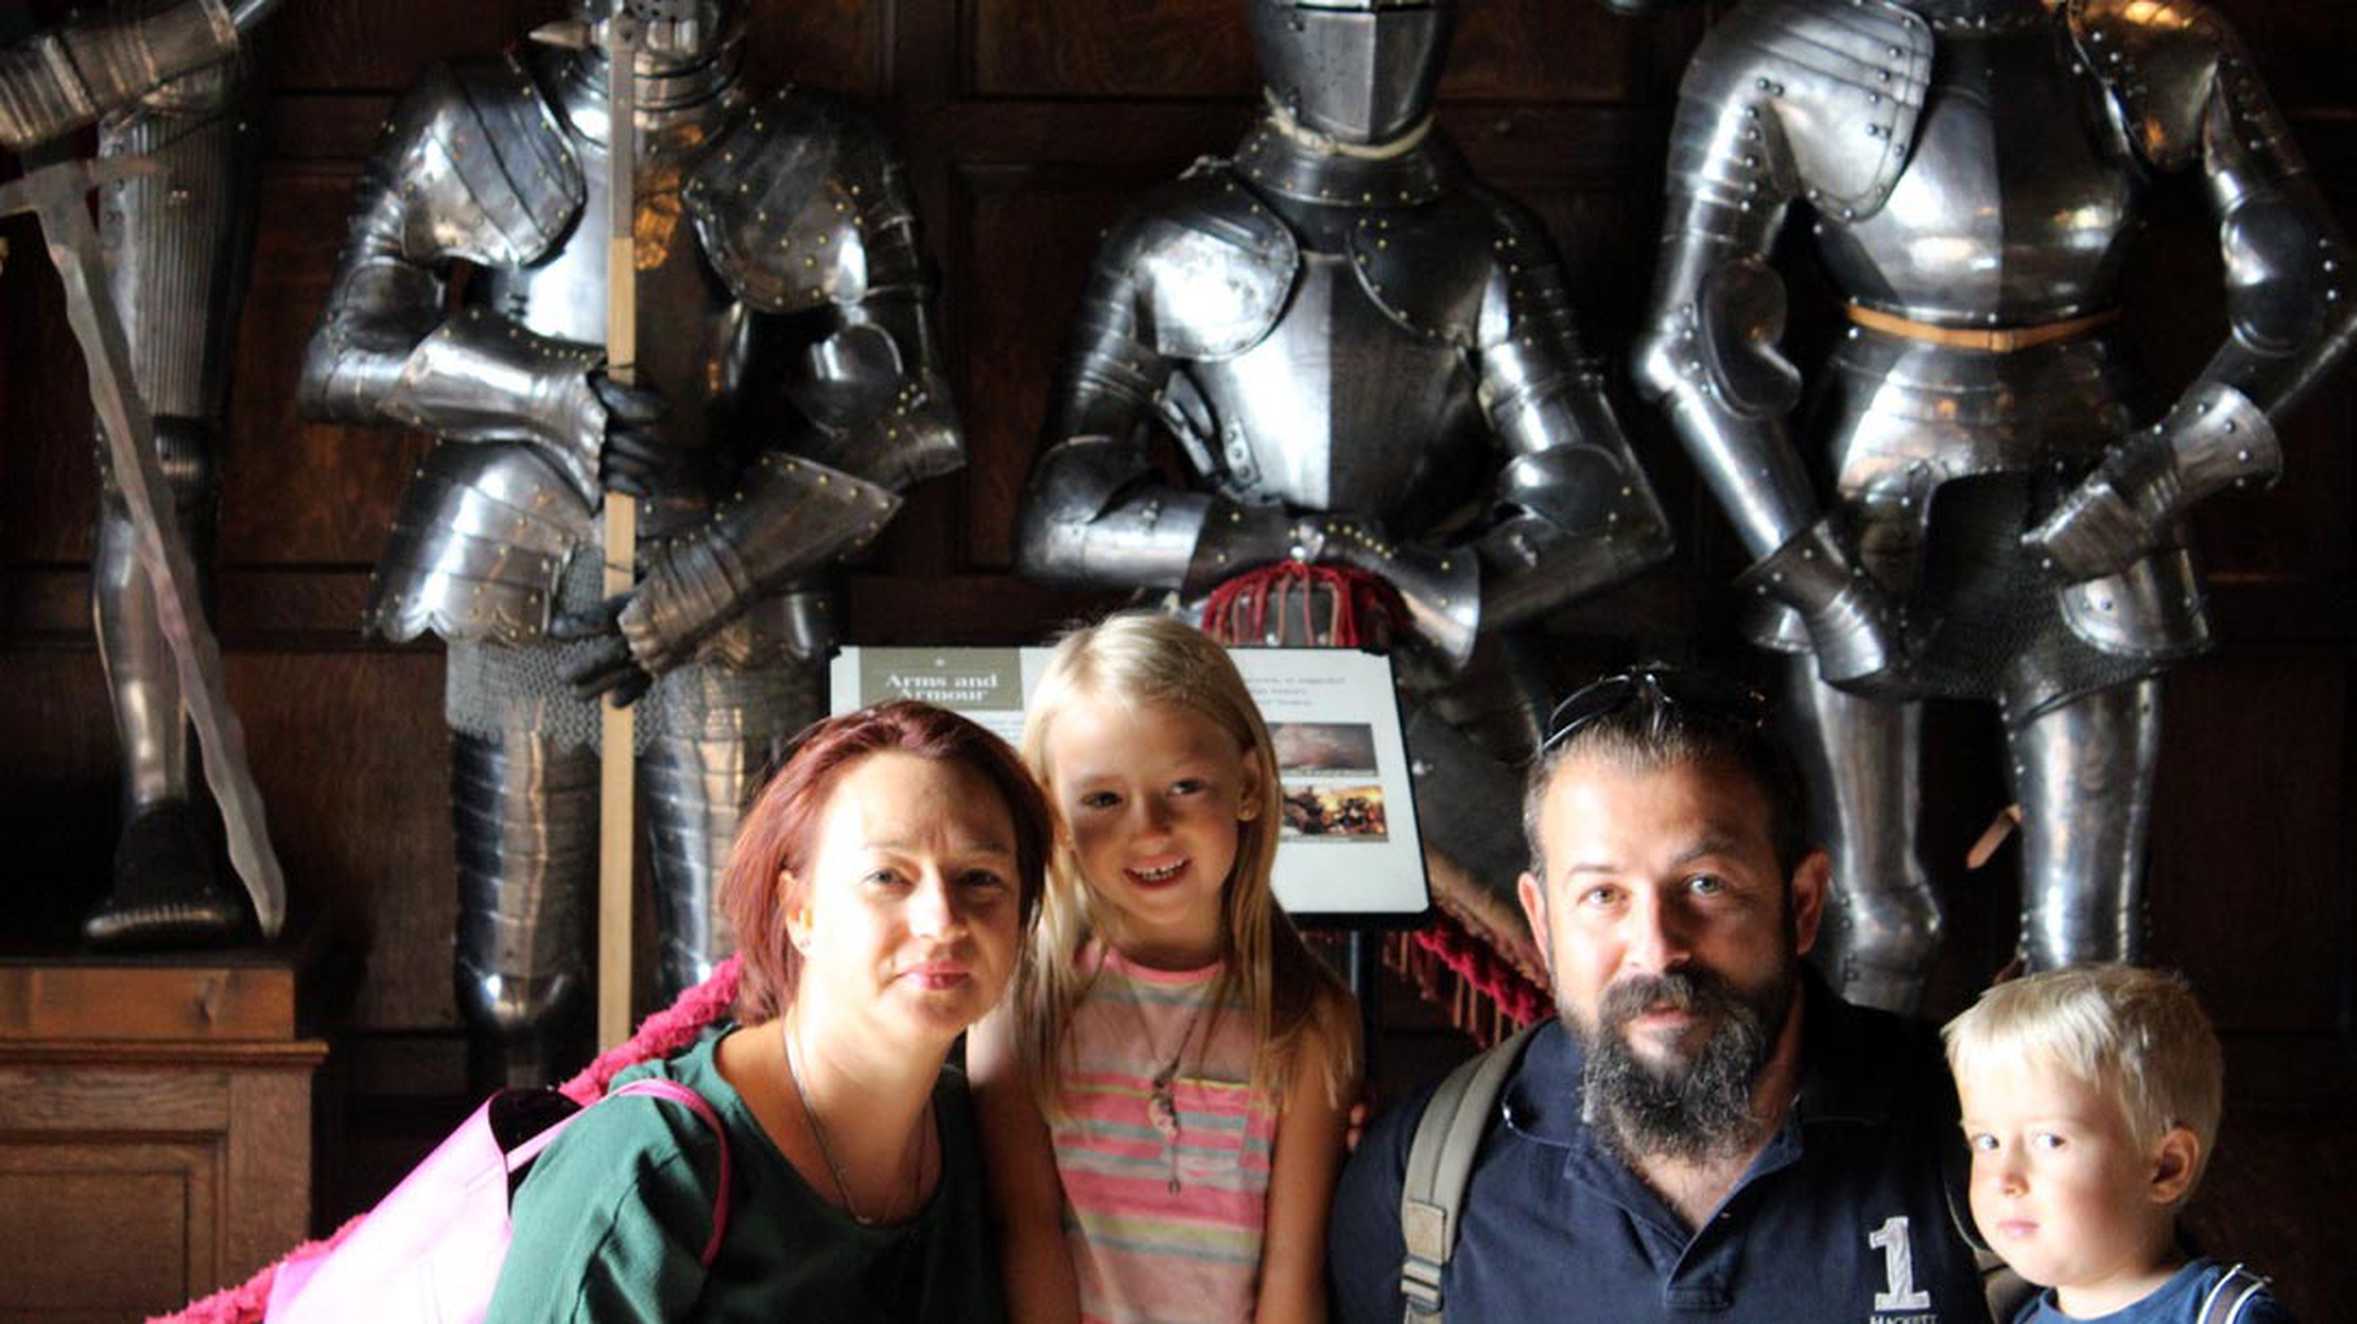 Hunor and his family posing in front of several suits of armour.